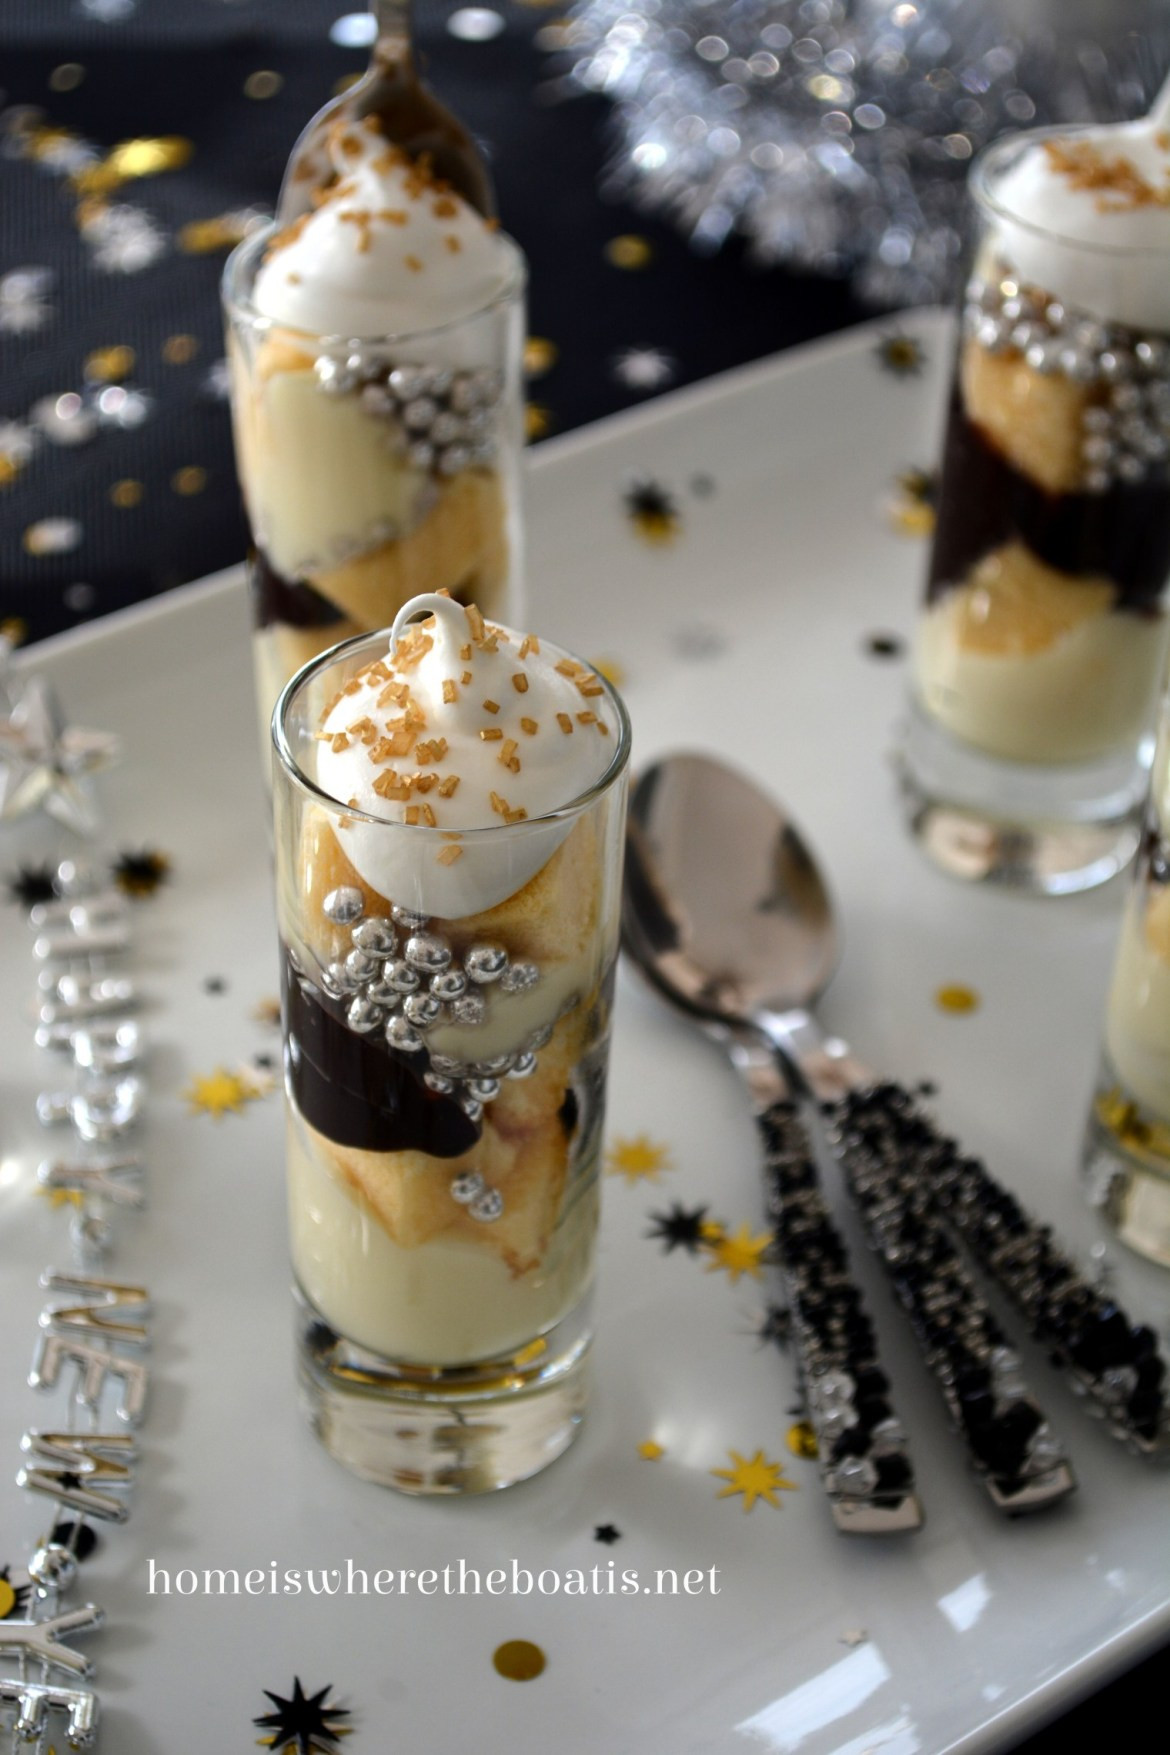 New Year Eve Desserts Recipes
 10 New Year s Dessert Recipes That er Actually Easy